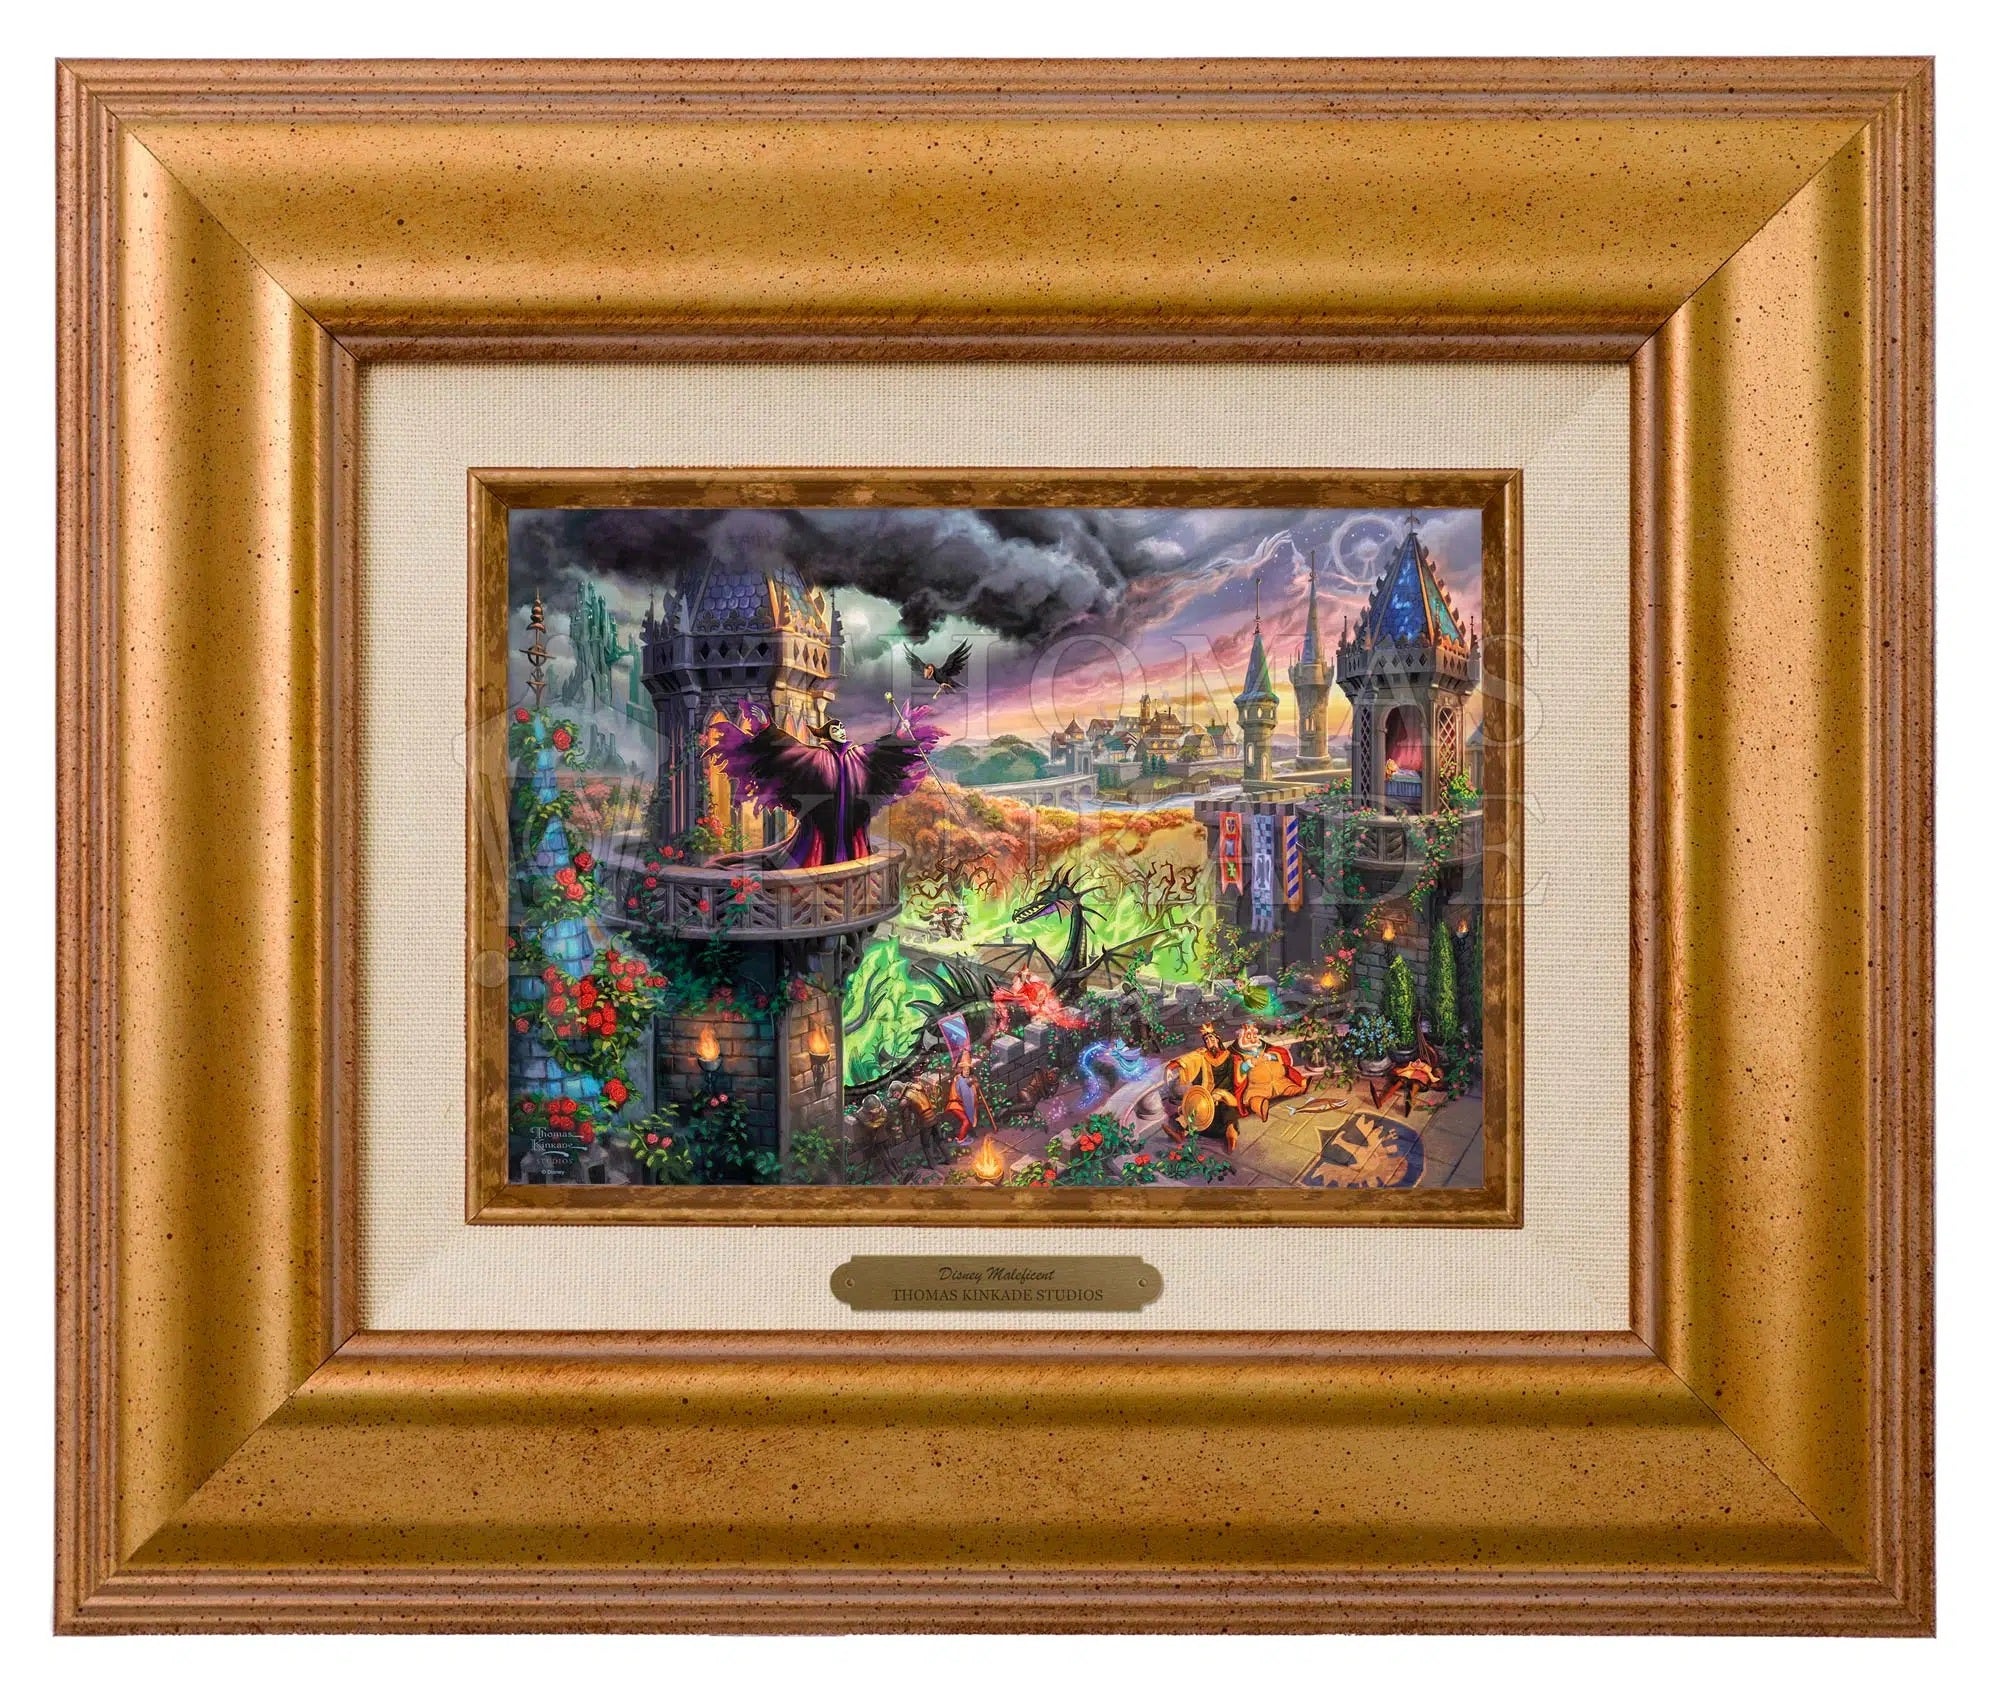 Disney Maleficent by Thomas Kinkade Studios.  Maleficent cast a sleeping spell on the entire castle, in her fiery rage.  - Golden Sunset - Frame